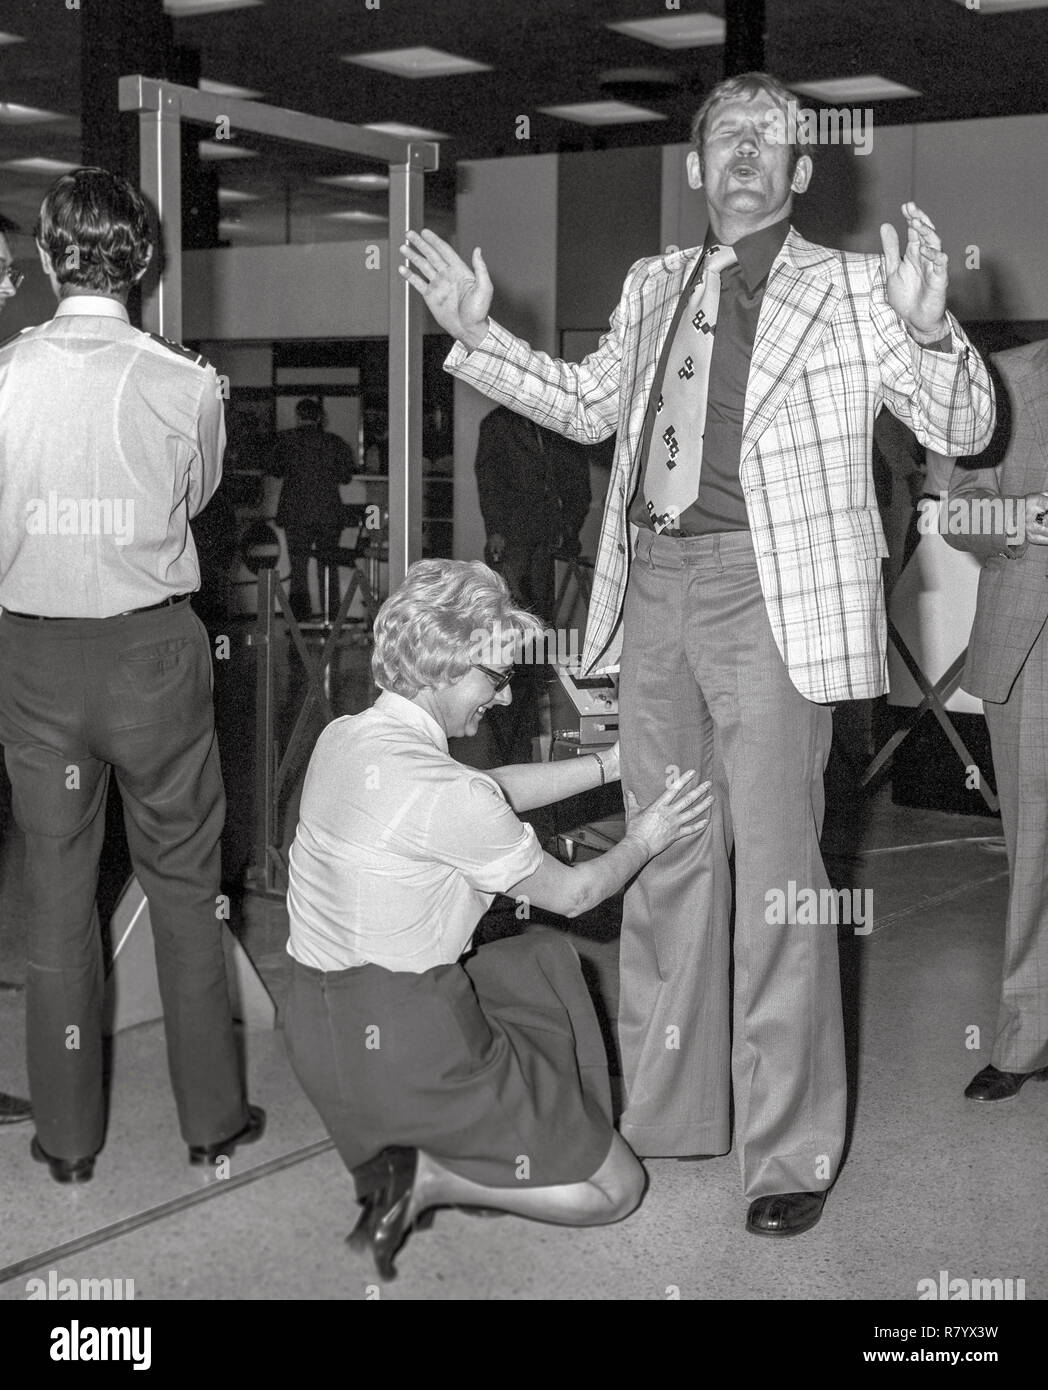 British heavyweight champion Richard Dunn leaving Heathrow Airport for Munich for his world title fight with Muhammad Ali. Picture shows Richard Dunn being  searched by female security guard prior to boarding the aircraft. Stock Photo